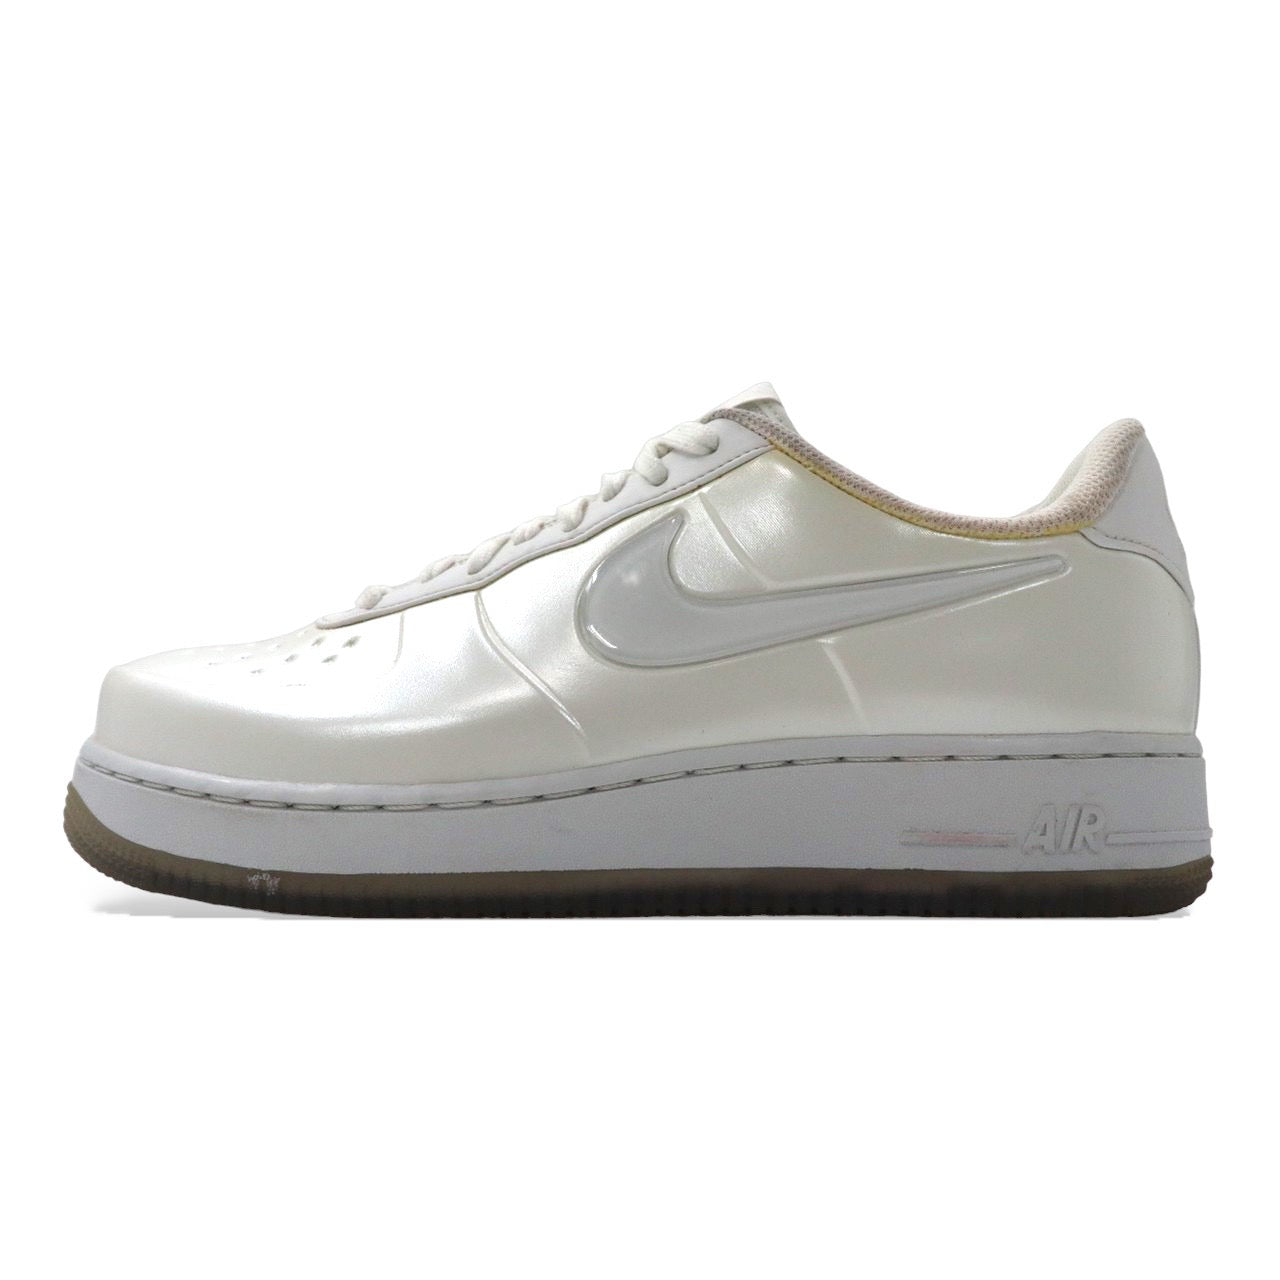 NIKE Sneakers US7 White Air Force 1 FOAMPOSITE PRO CUP Air Force 1 Form  Positive AJ3664-100 2019 model